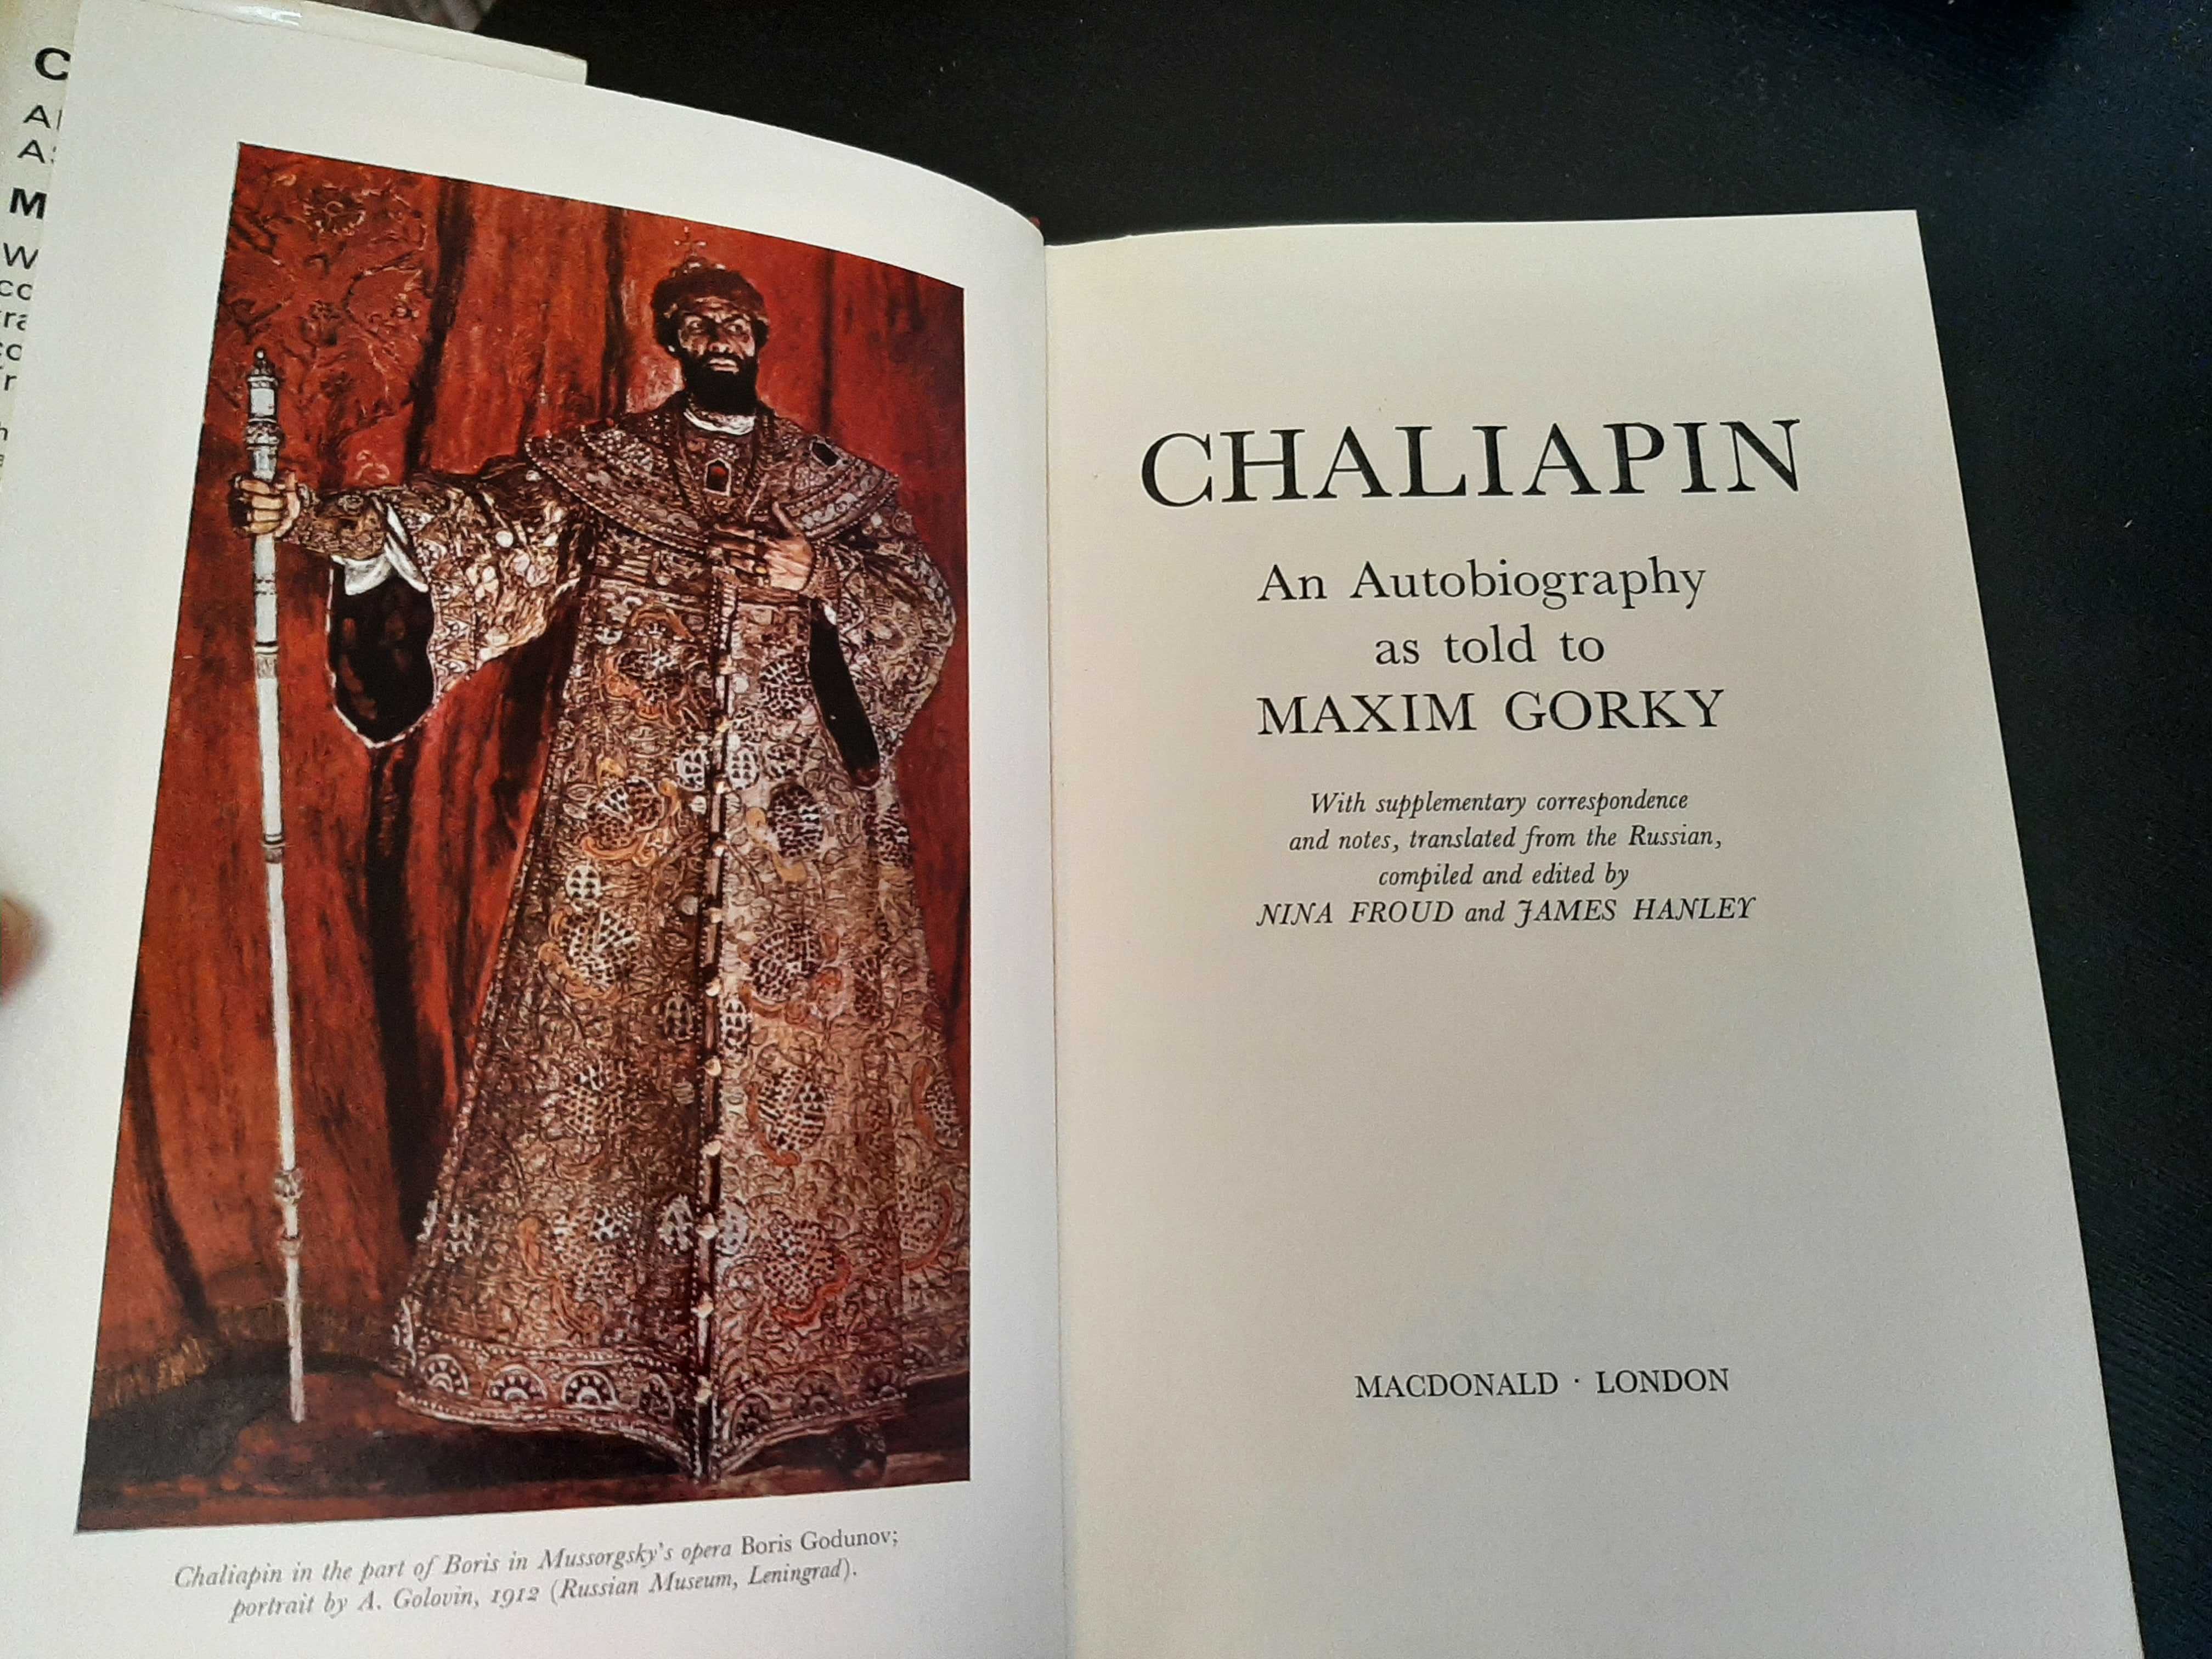 Chaliapin: an Autobiography, as told to Maxim Gorky